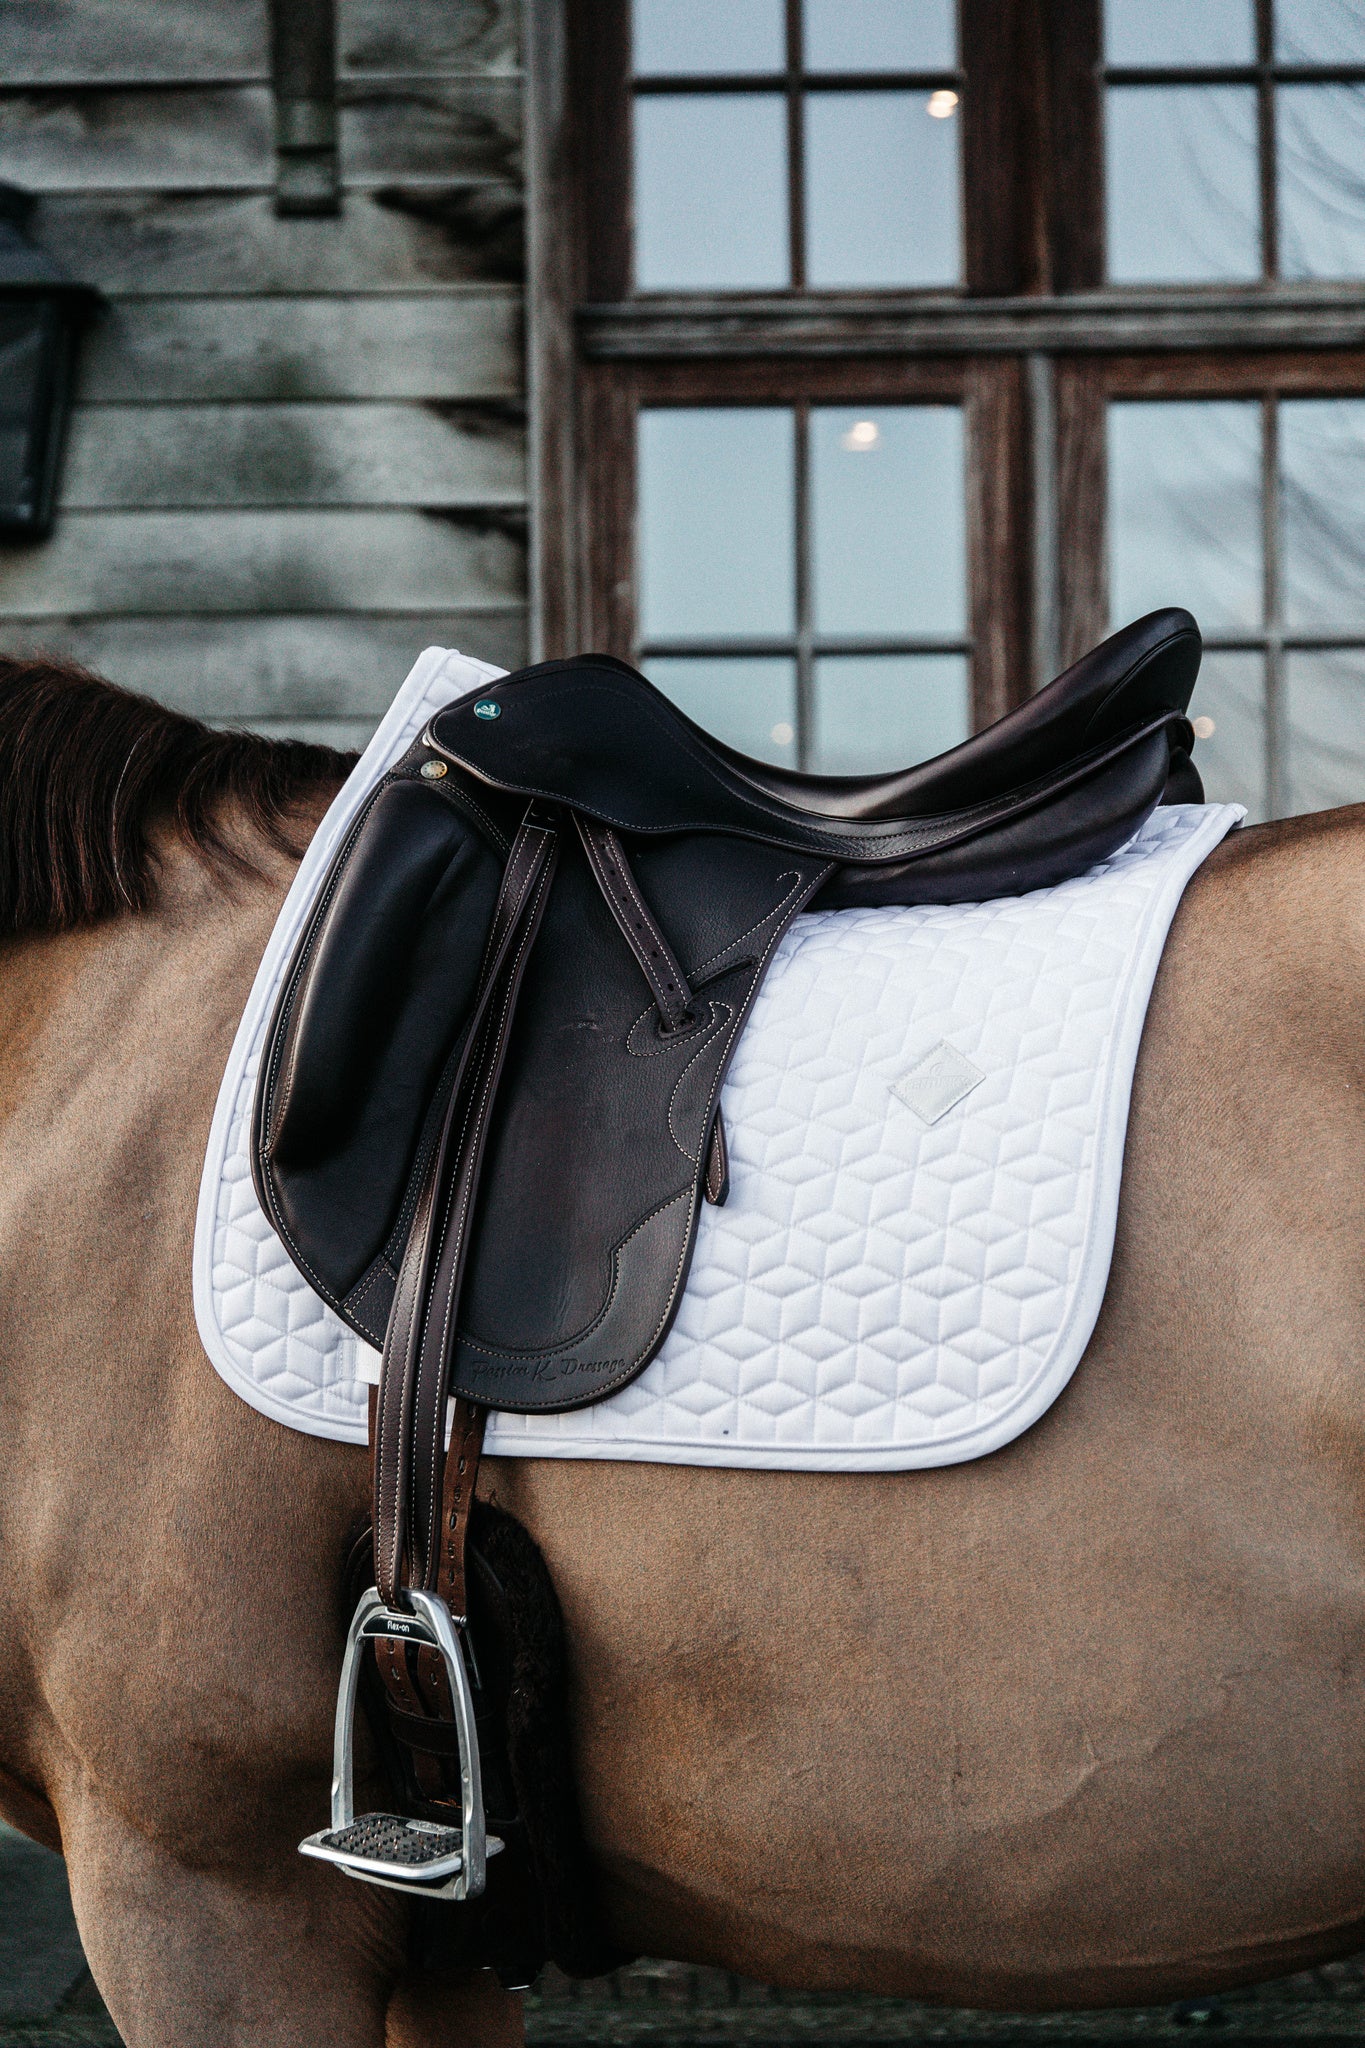 The all white classic dressage pad by Kentucky is the perfect timeless and classy saddle pad for competitions or riding at home for a more simplistic look.